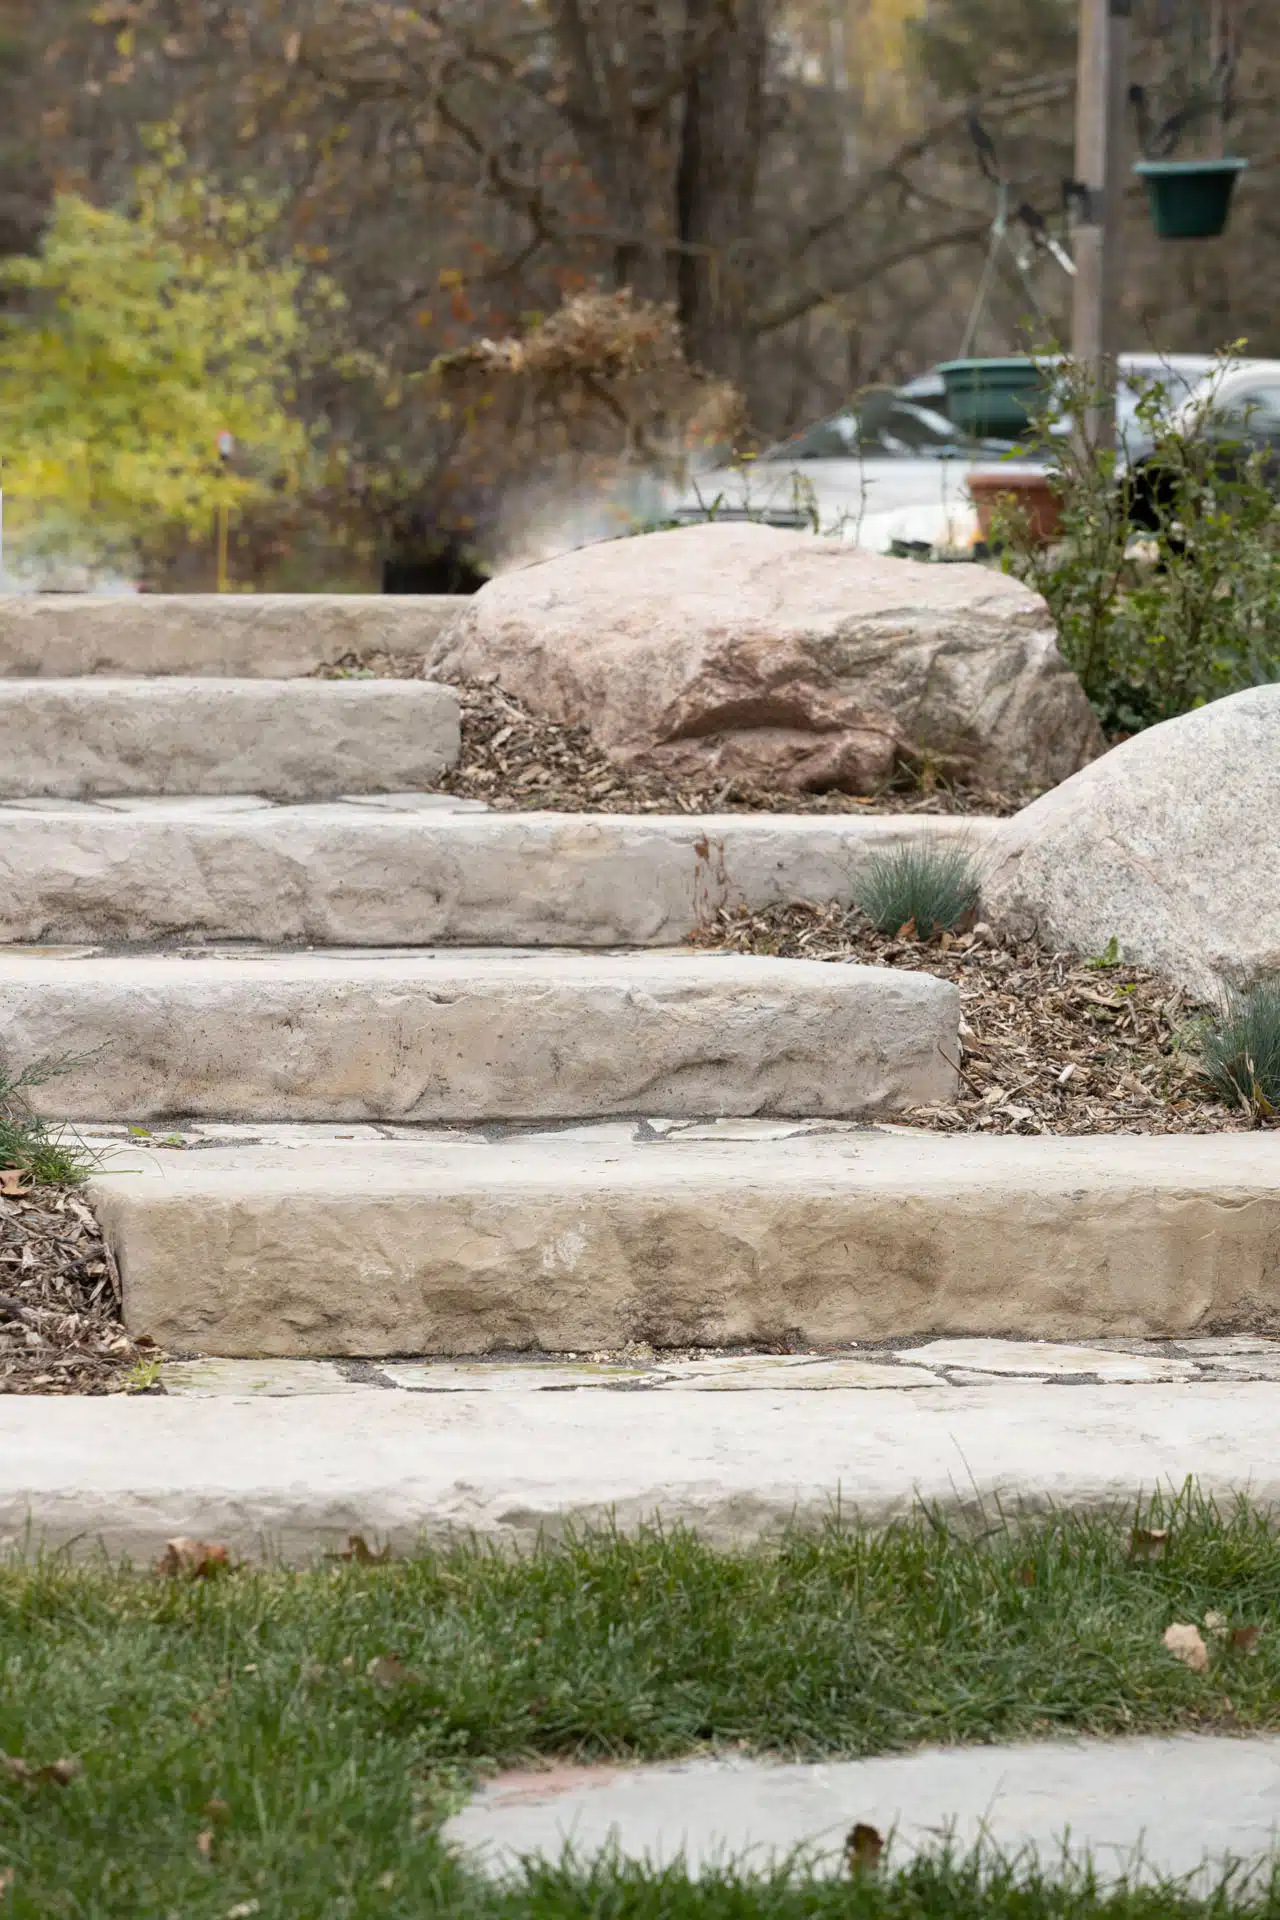 Rustic stone steps lead through a natural landscape with large boulders